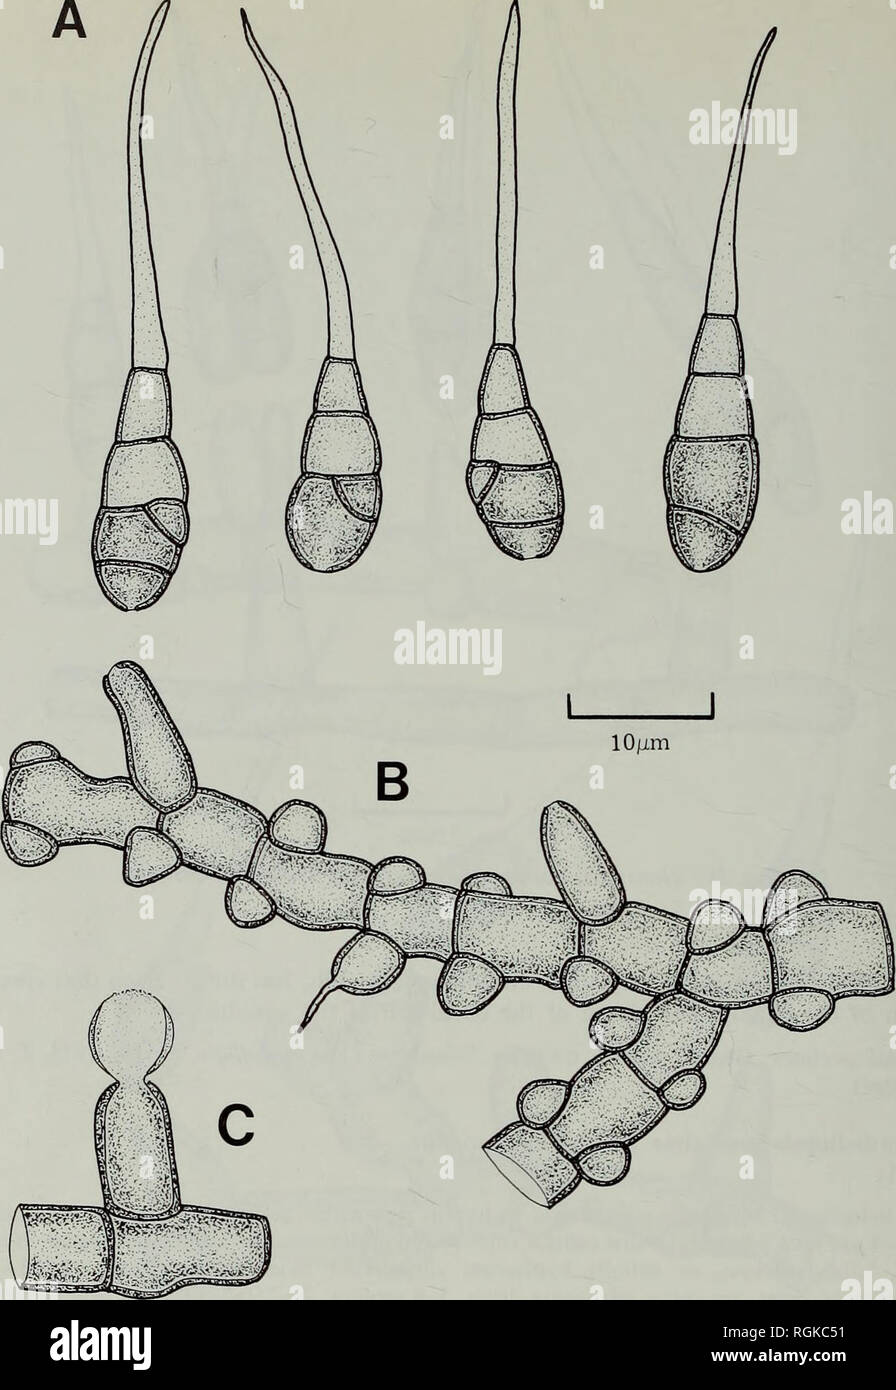 . Bulletin of the British Museum (Natural History) Botany. 230 D. L. HAWKSWORTH. Fig. 22 Hansfordiellopsis variegata (IMI 4778c—holotype). A, Conidia. B, Conidiogenous cells and mycelium with hyphopodia-like cells. C, Conidium in a very early stage of formation. scar, 18-20x3-5-5 urn. Conidia solitary, dry, acrogenous, obclavate, smooth-walled, 3^4(—5) septate, portion excluding the terminal cell 12-15x3-5-5 urn, brown, basal cell truncated with a scar 1-1 -5 urn wide, apical cell markedly elongated, subhyaline, mainly 10-12 urn long but variable in length, tapering to 1-2 urn wide near the ap Stock Photo